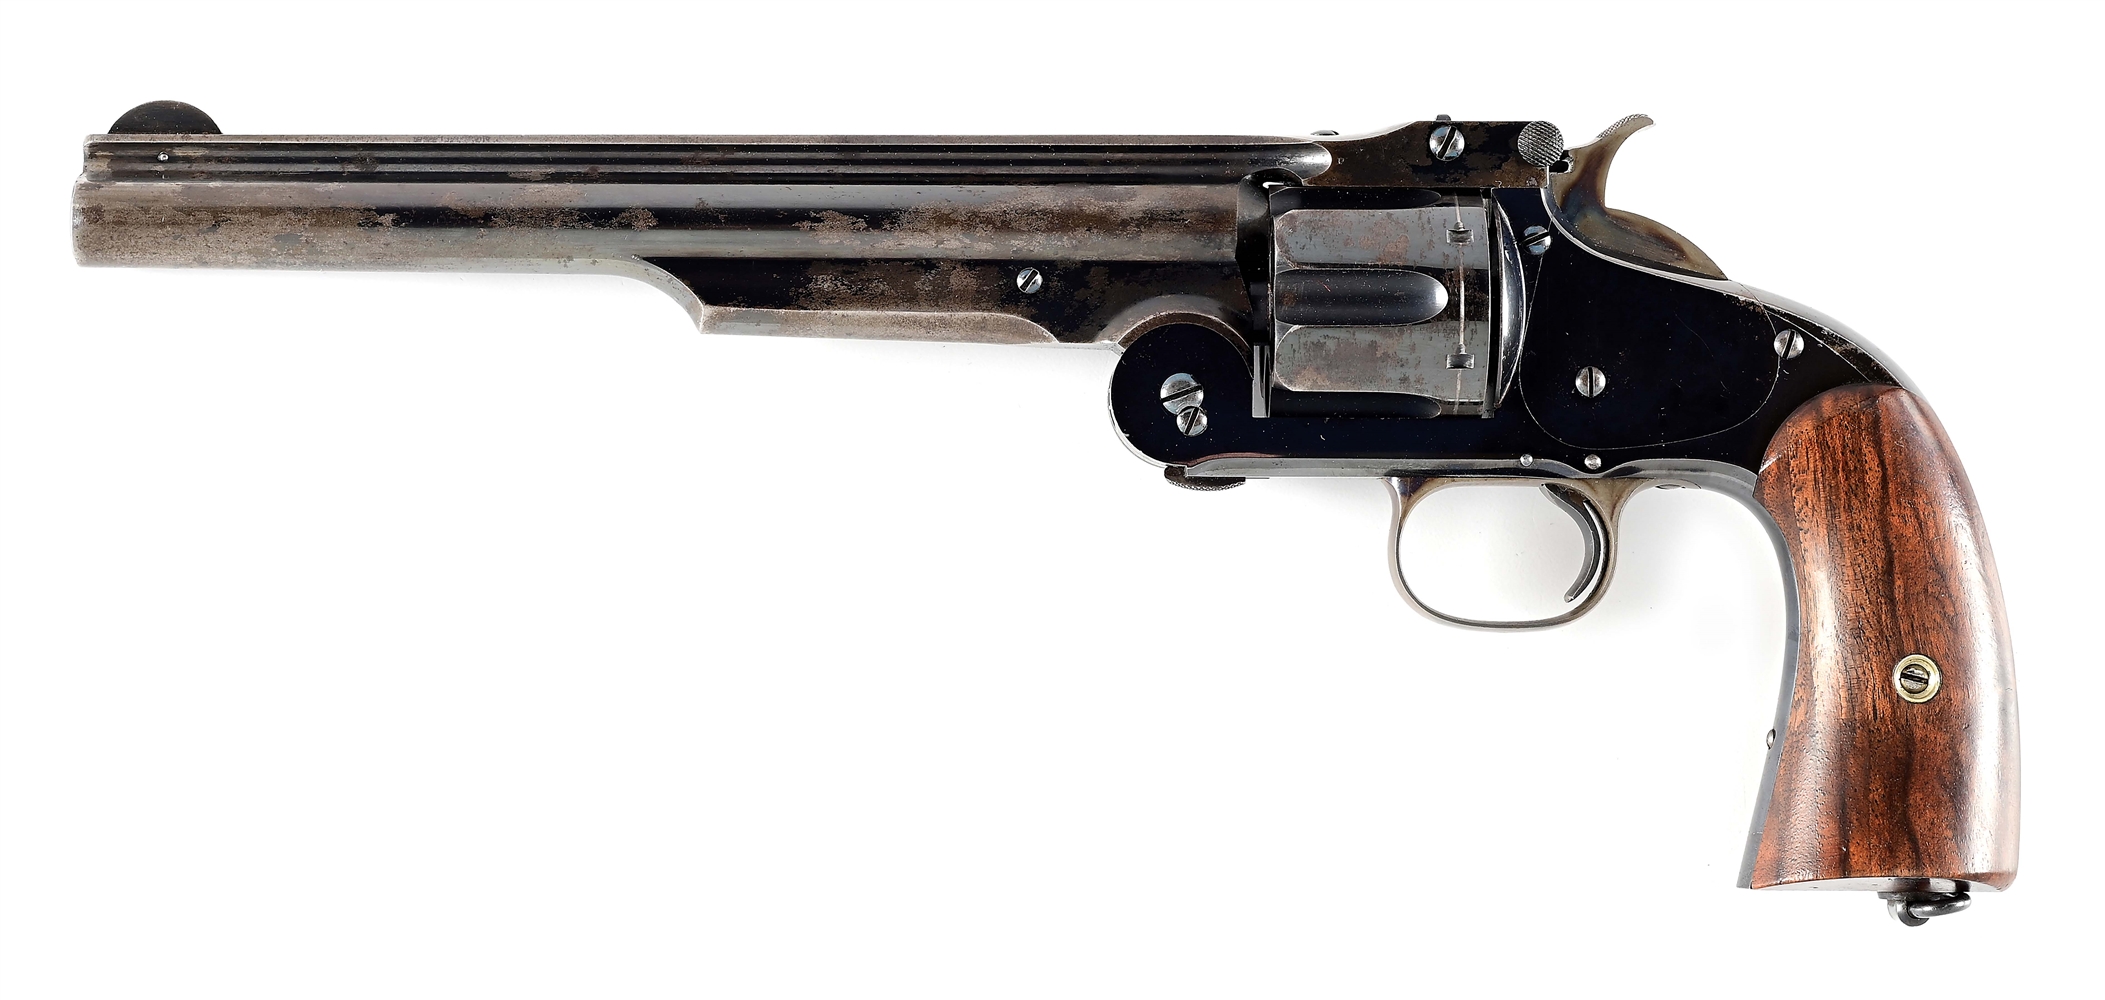 (A) S&W RUSSIAN PROTOTYPE REVOLVER, SERIAL NUMBER 1, WITH UNUSUAL BIRDSHEAD GRIP.